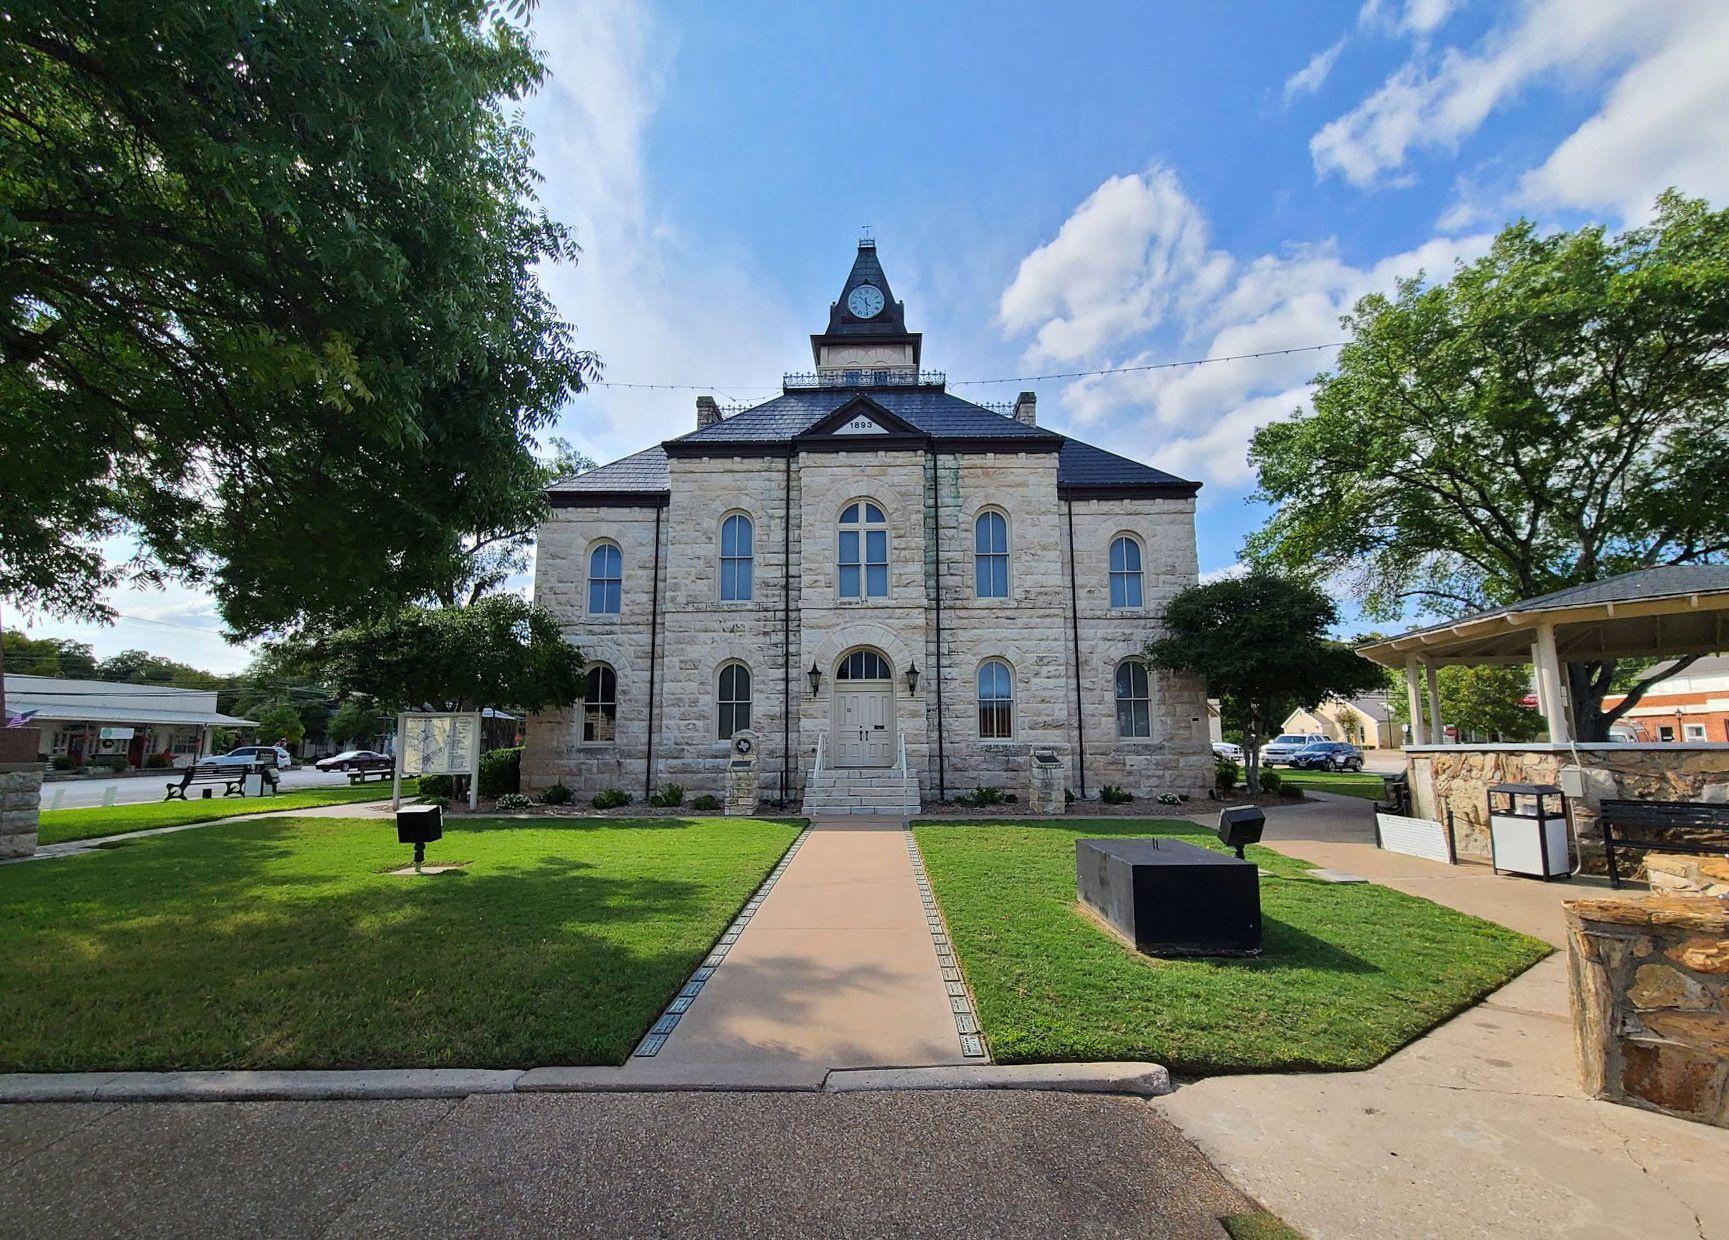 A view of the Glen Rose Courthouse. The buliding is white with a navy blue roof.